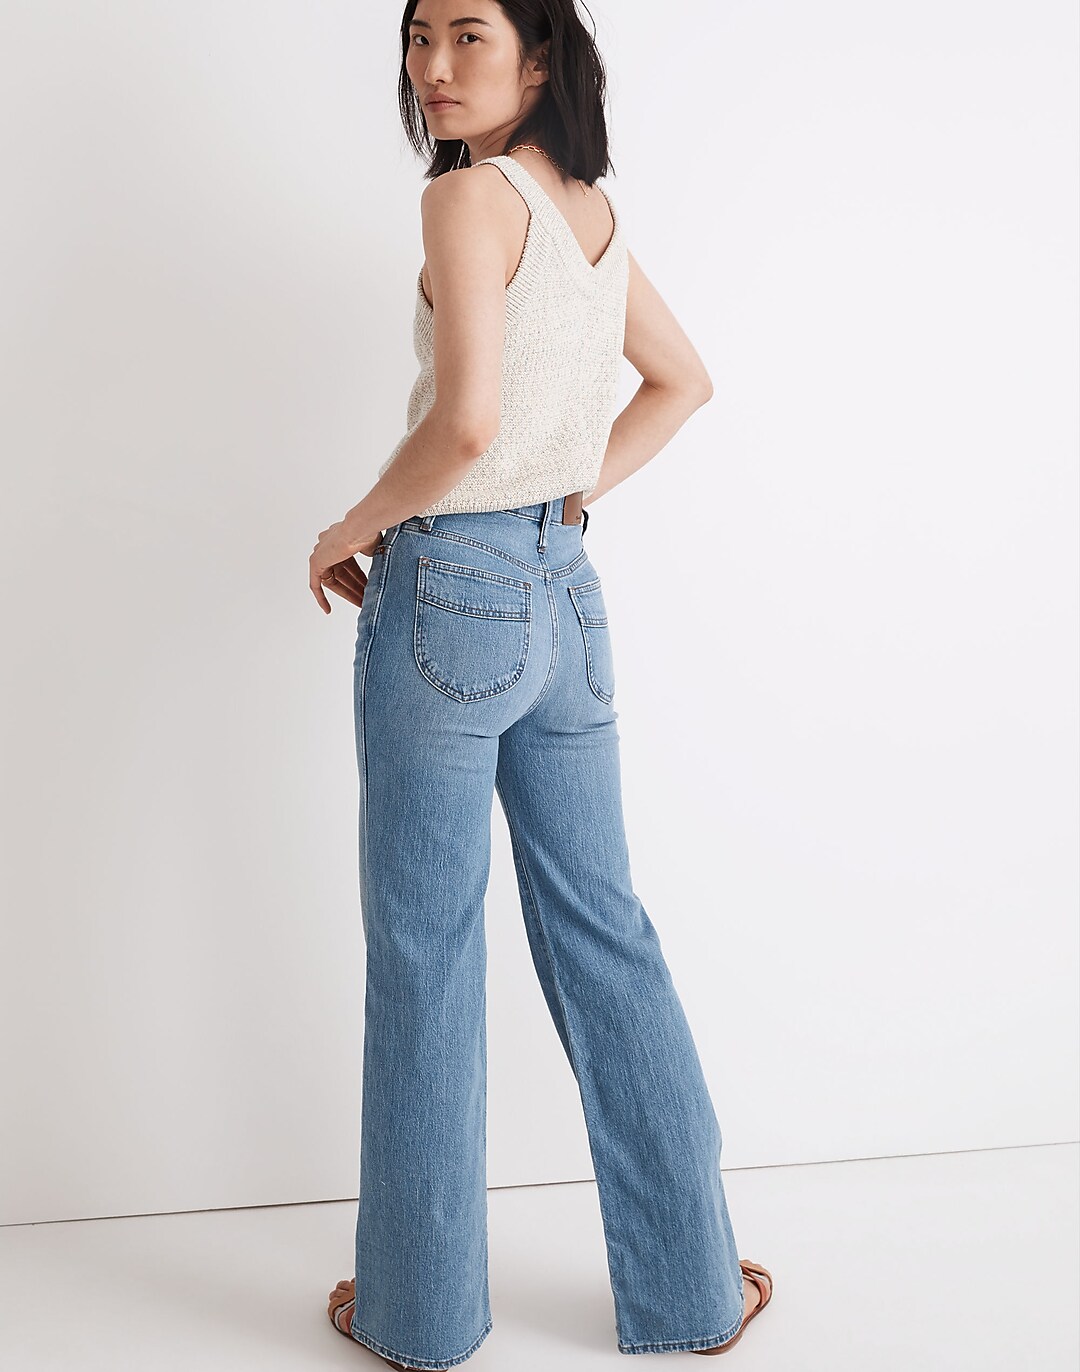 NEW Madewell High-Rise Flare Jeans in Caine Wash, Petite 29 